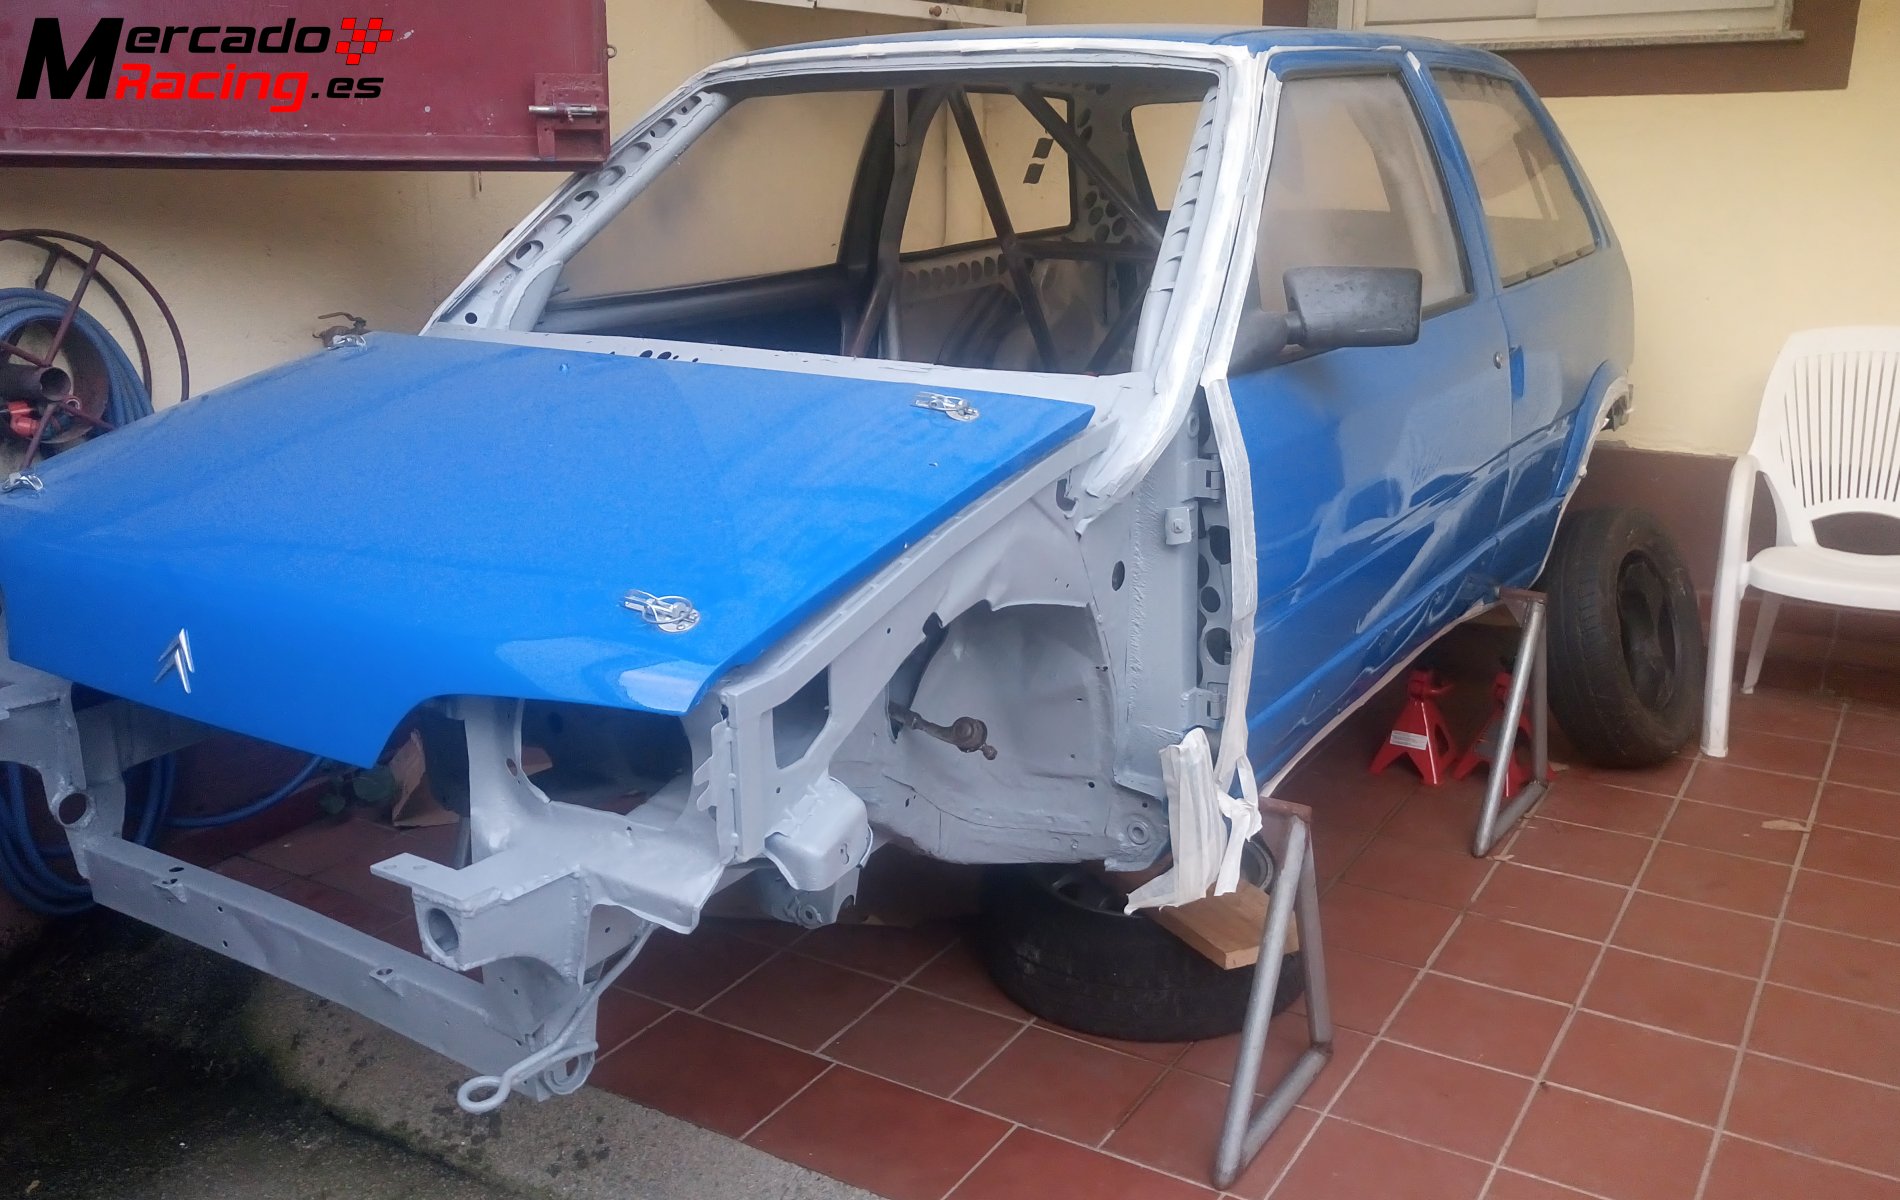 Proyecto ax gti